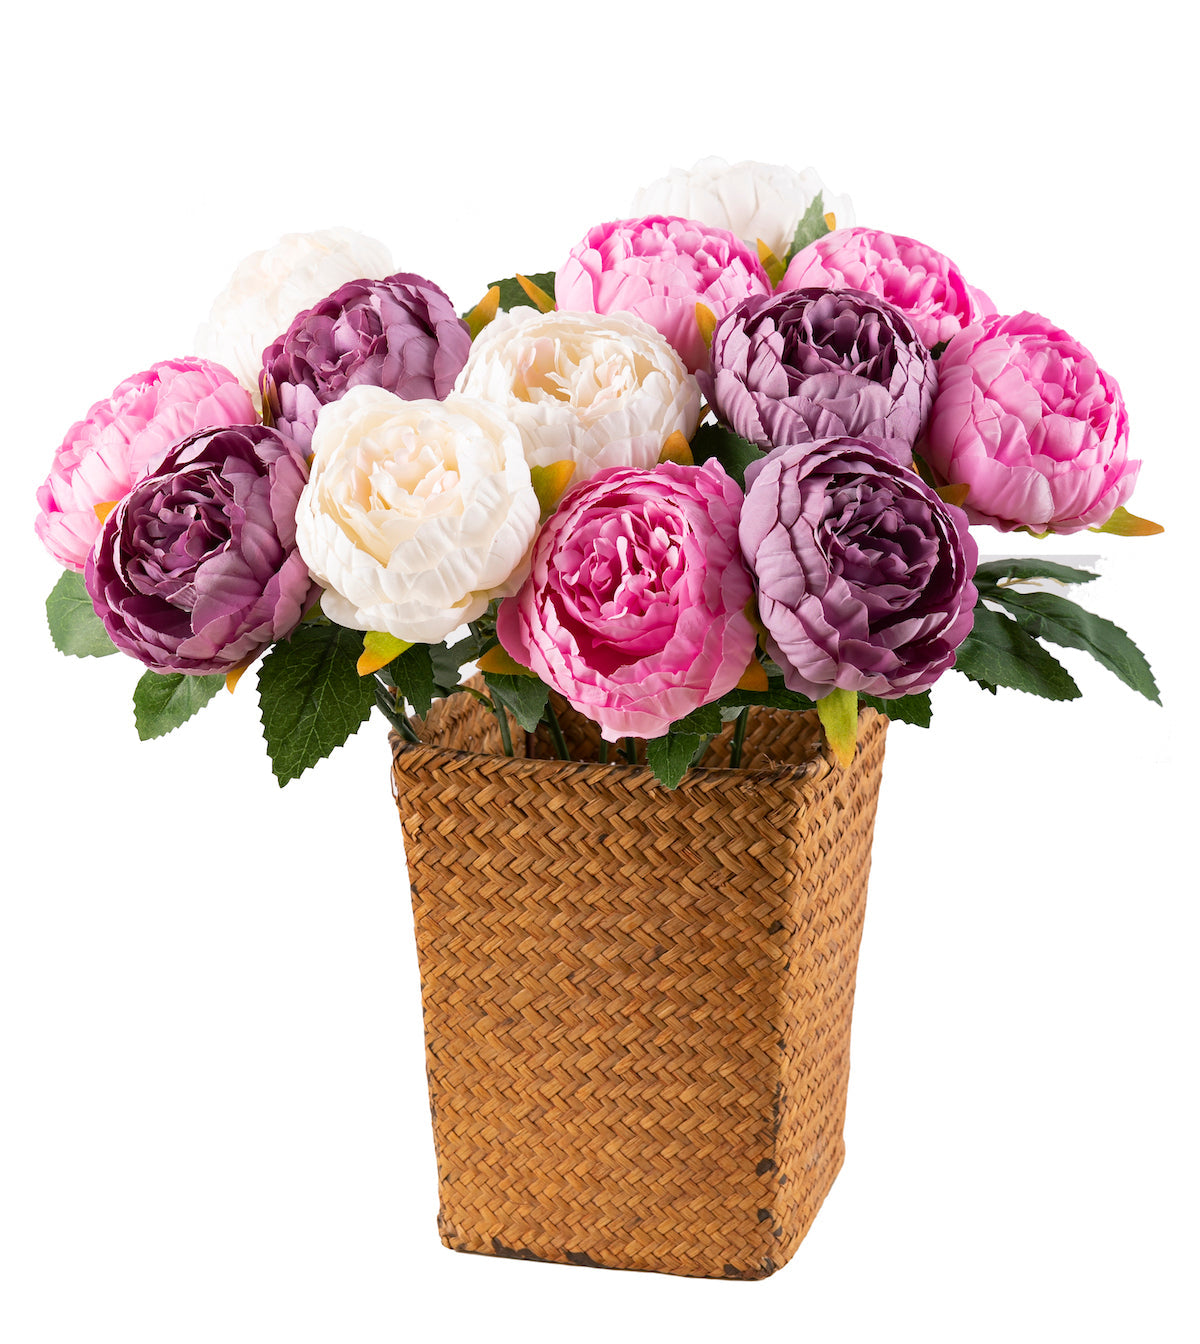 FF-PEOKT6COMP: Forever Flowerz Premium Peonies Kit with Stems - Vintage Edition